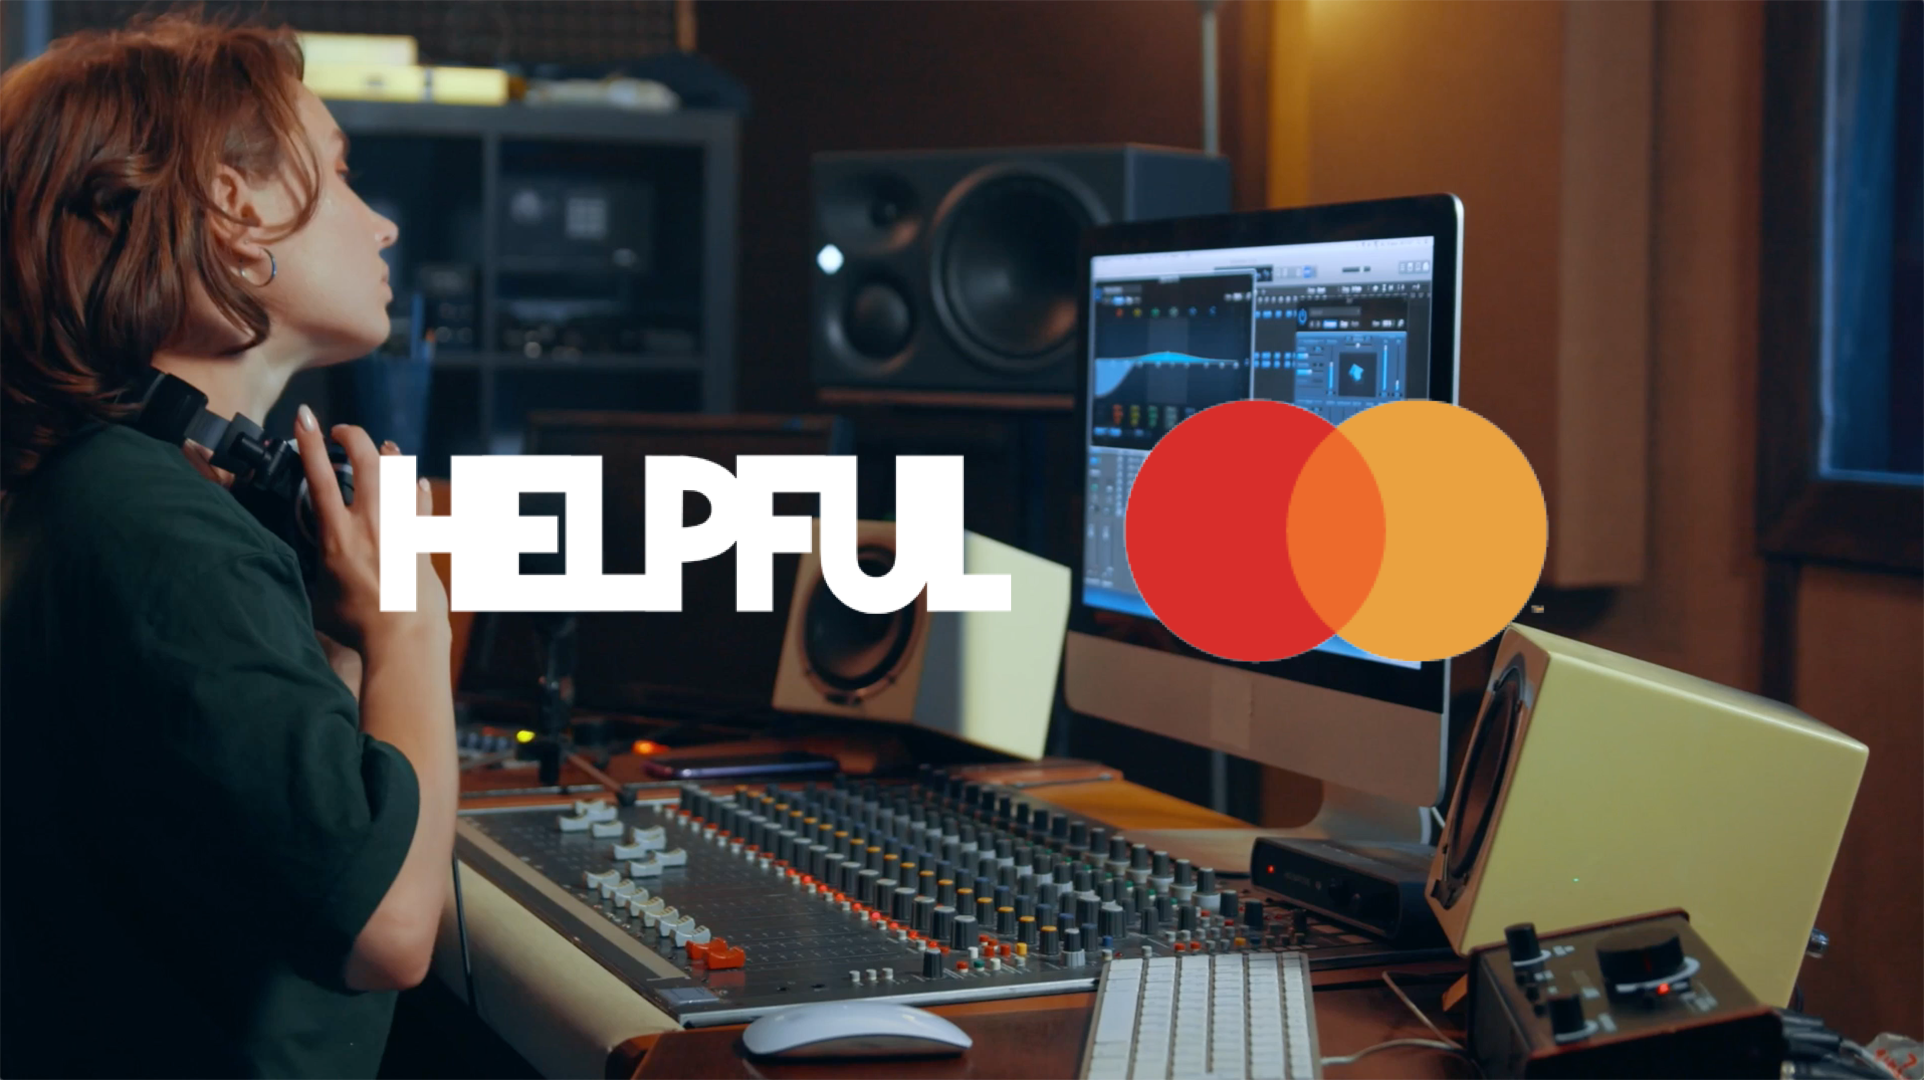 HELPFUL has partnered with Mastercard to enable creator and music platforms to reach their full potential by offering automated, instant, cross-border payouts